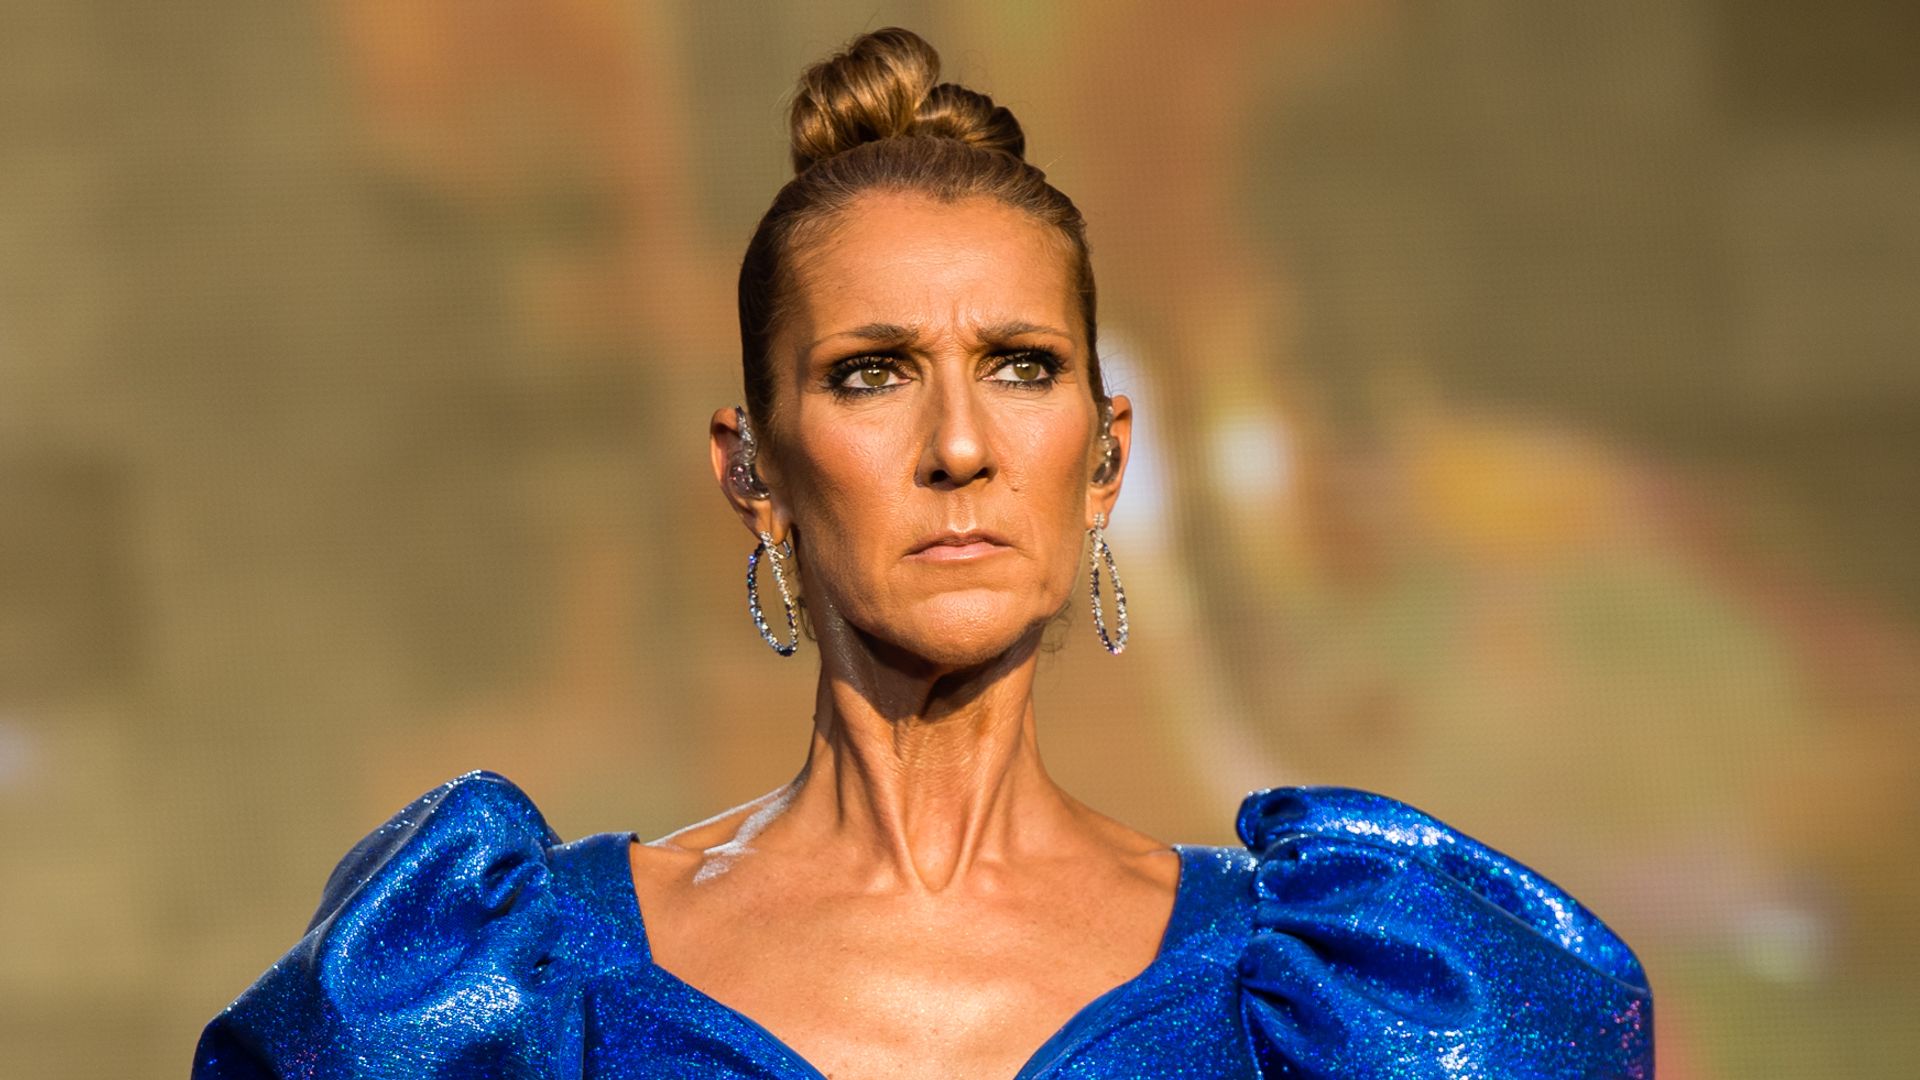 Celine Dion's heartbreaking health update revealed amid new living